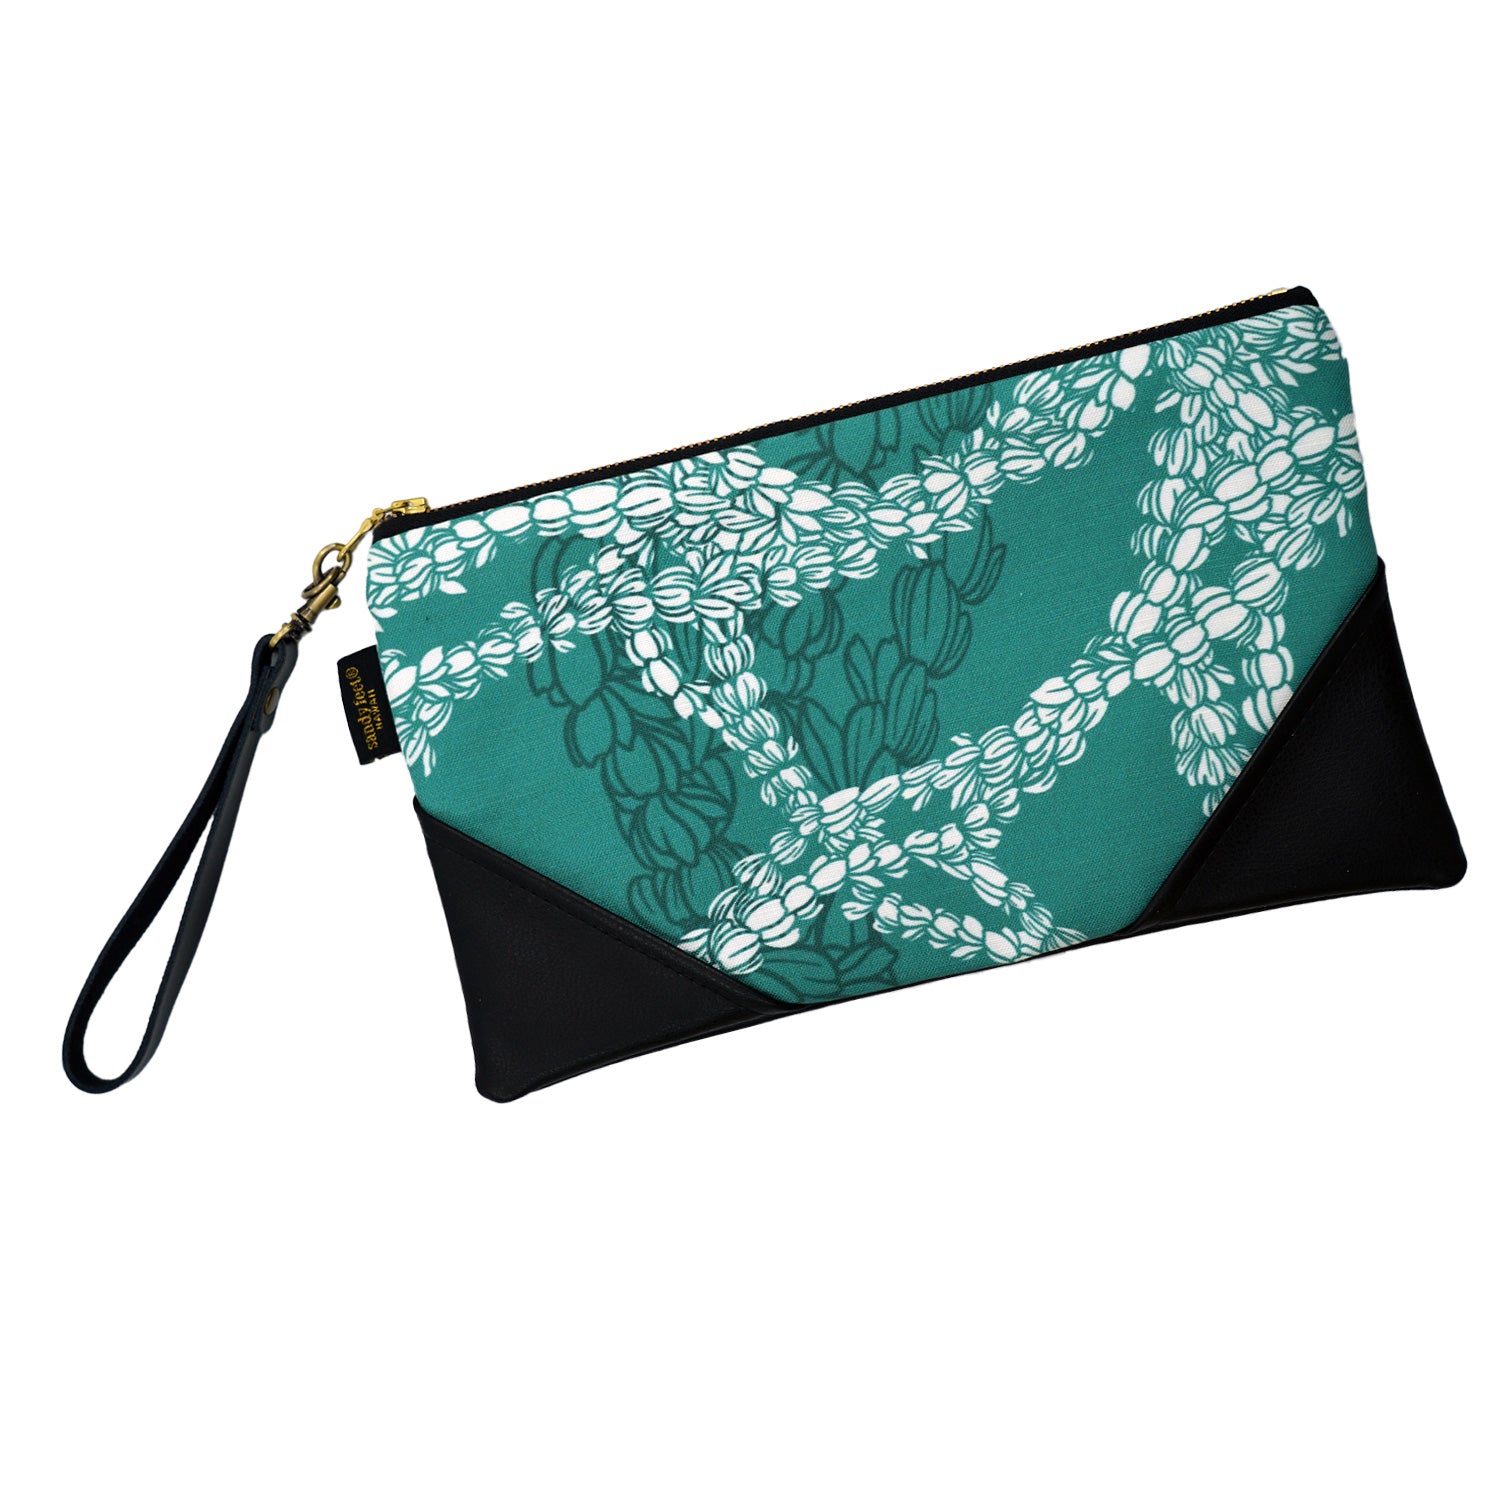 Large Canvas & Vegan Leather Clutch with Strap - Peacock